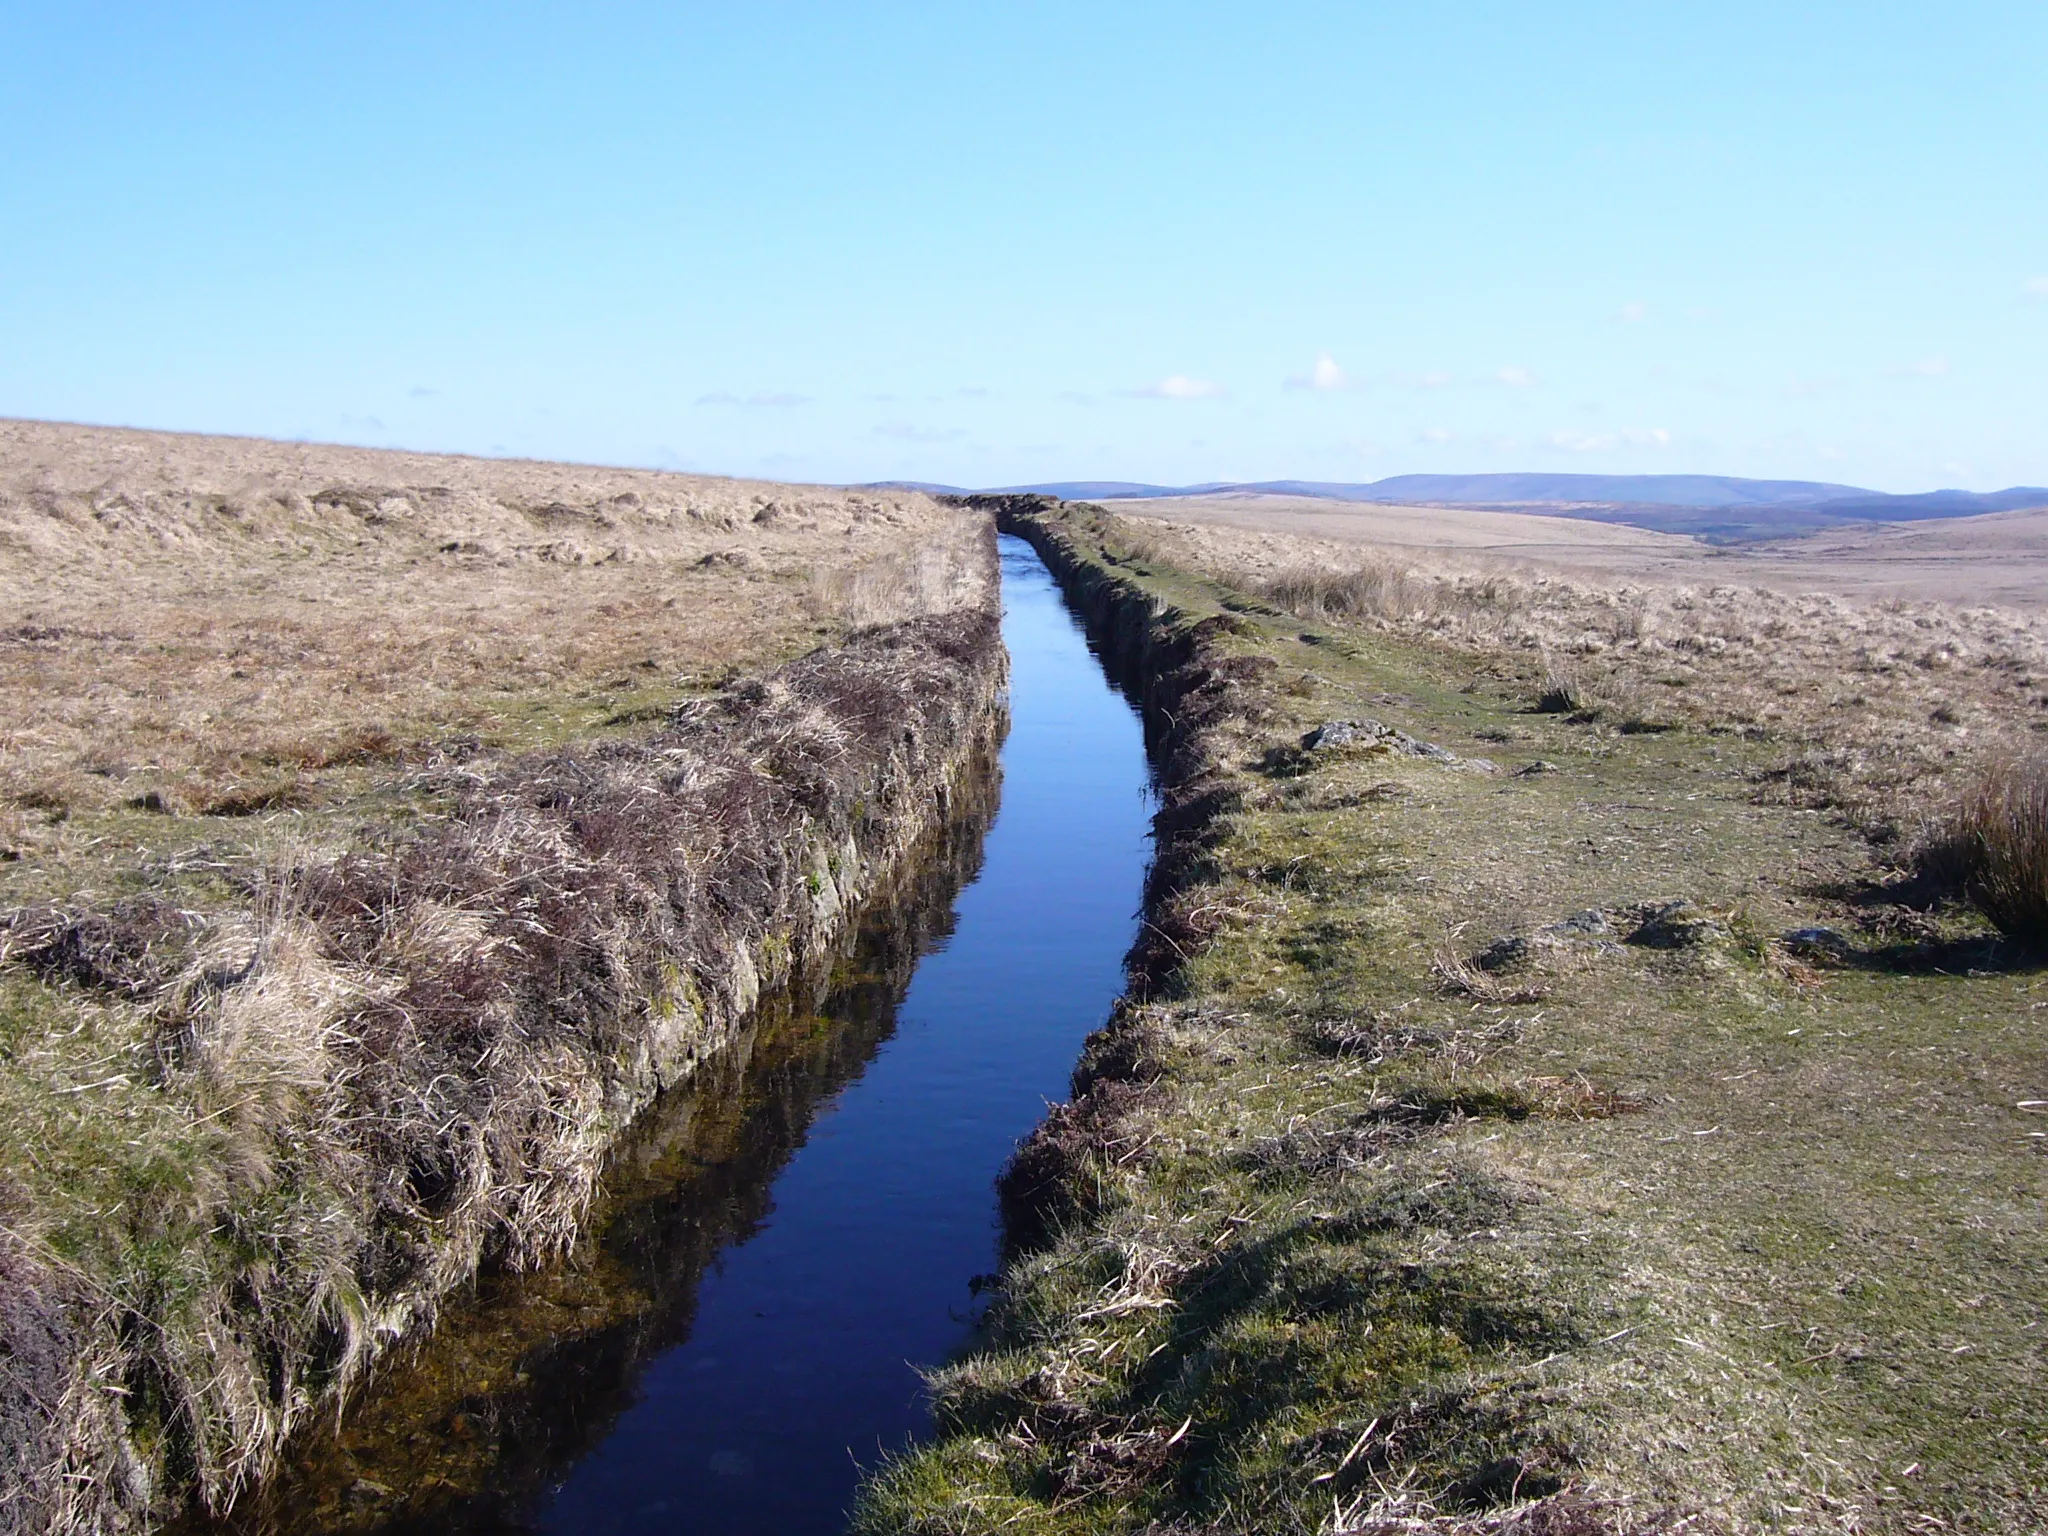 Photo showing: This shows the Devoport leat on Dartmoor close to Nun's Cross Farm looking up stream. This leat is taken from the West Dart & Cowsic rivers and flowed by gravity to Devonport. The length is over 34km and the leat was in use from around the start of the 18th century.